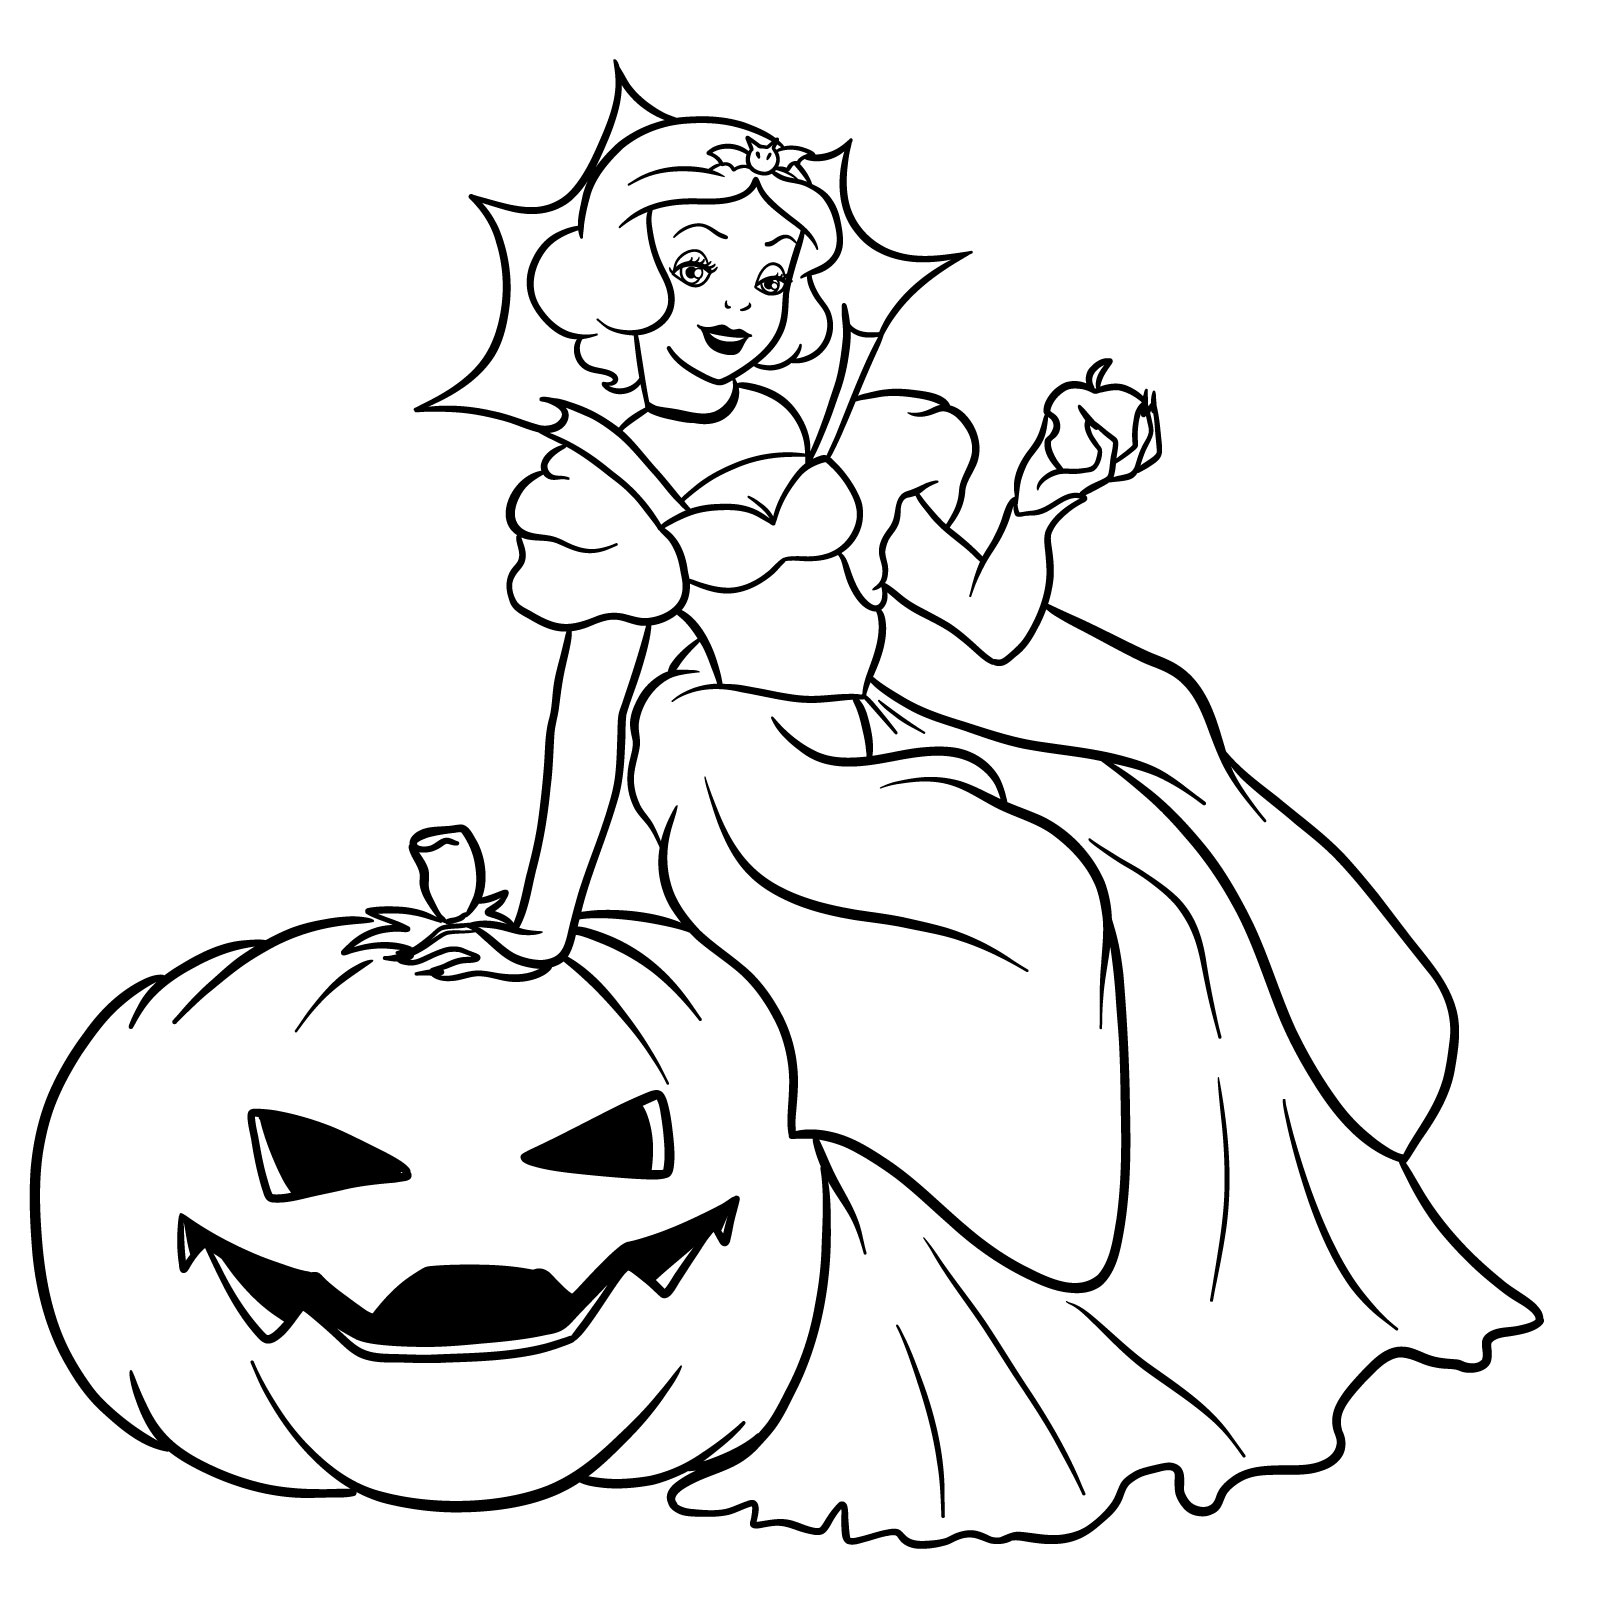 How to Draw Halloween Snow White - final step